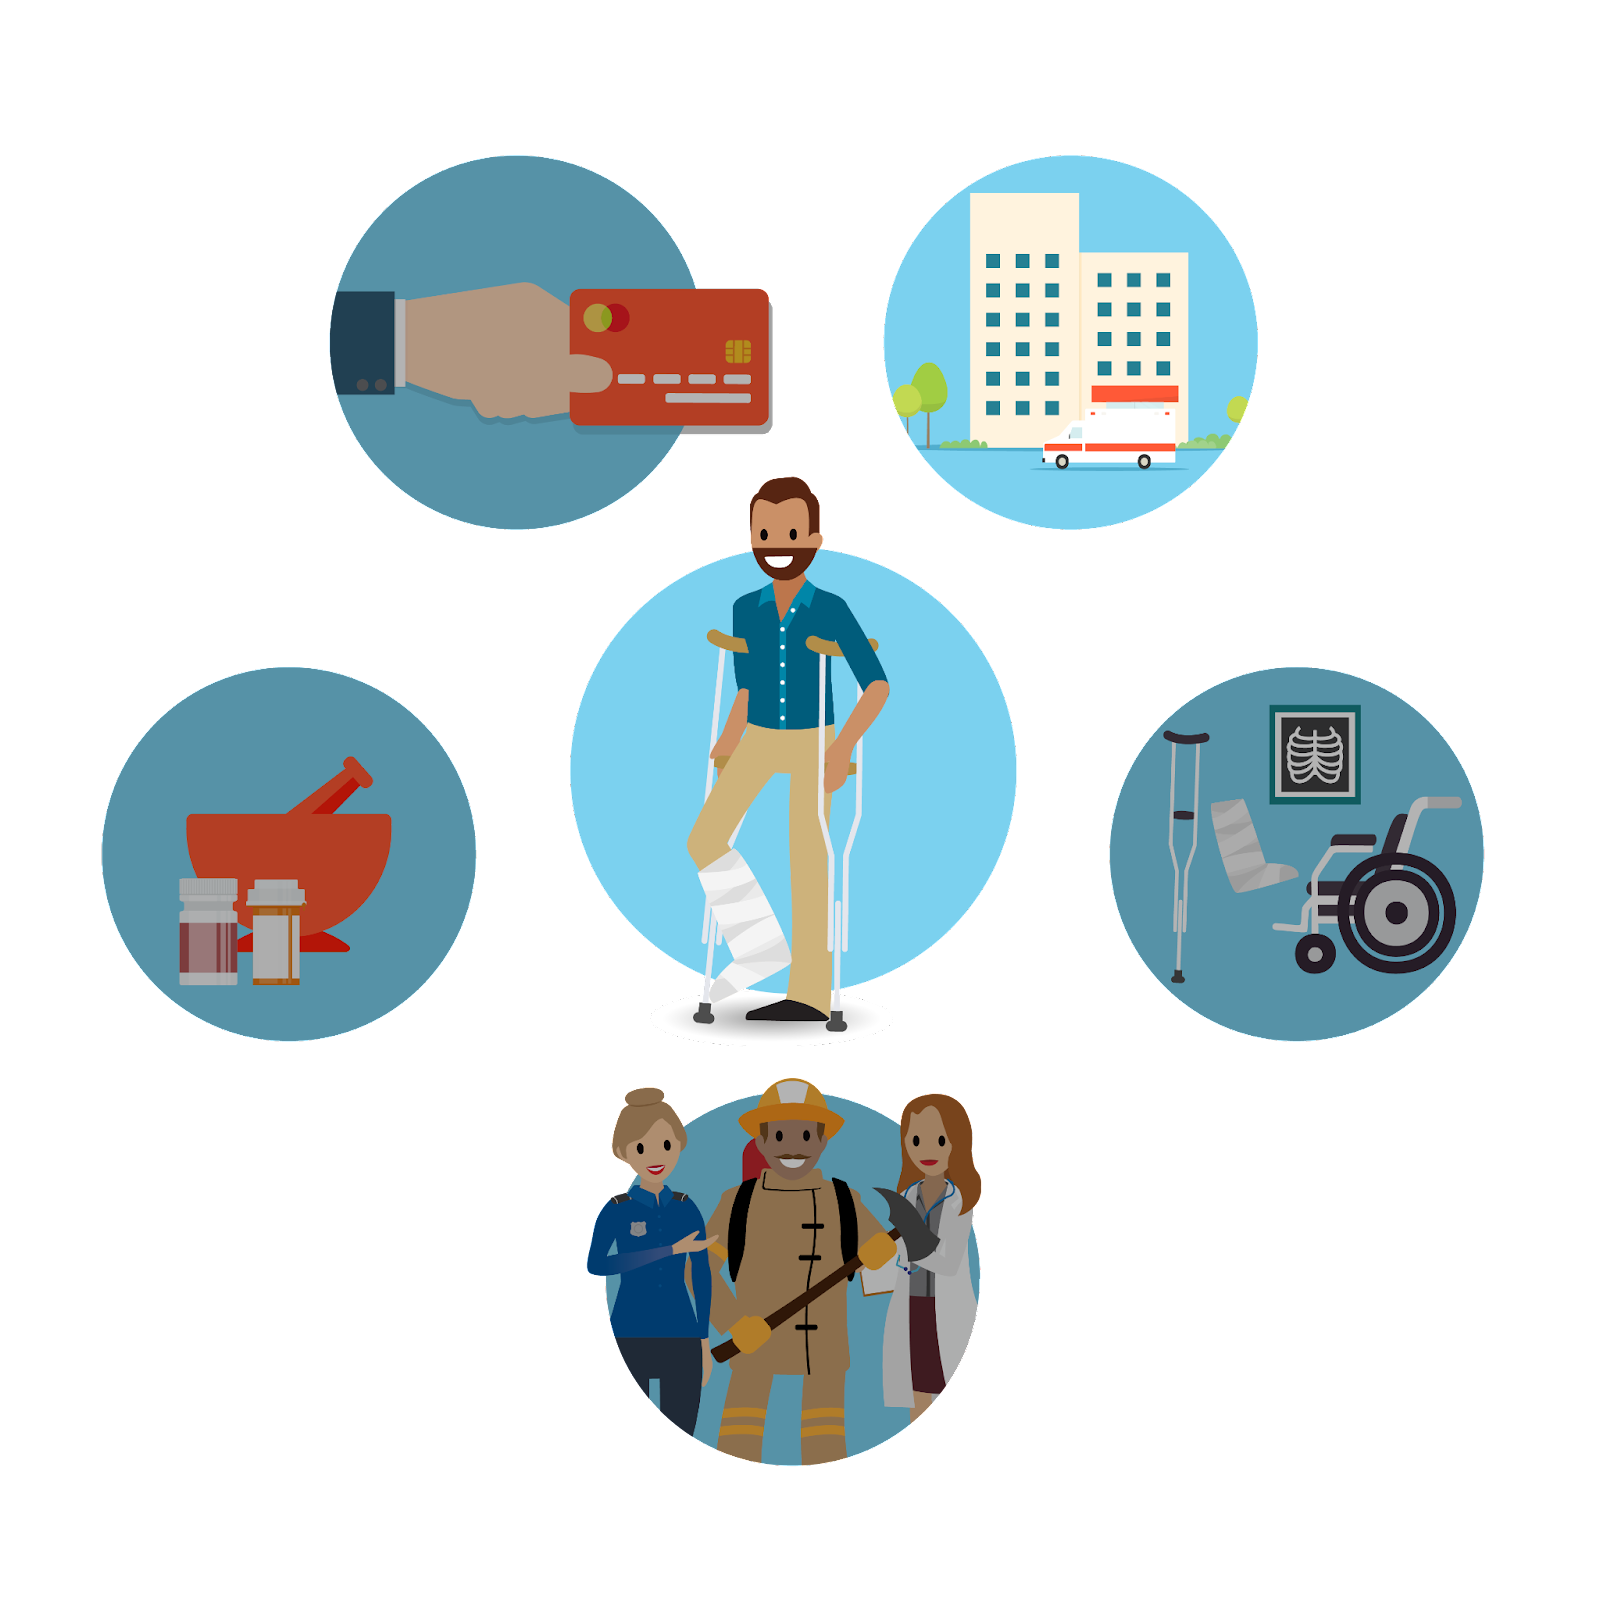 Patient at center with his leg in a cast. Five icons surround him, representing providers, payers, pharmaceuticals, MedTech, and public sector health, with providers icon highlighted.